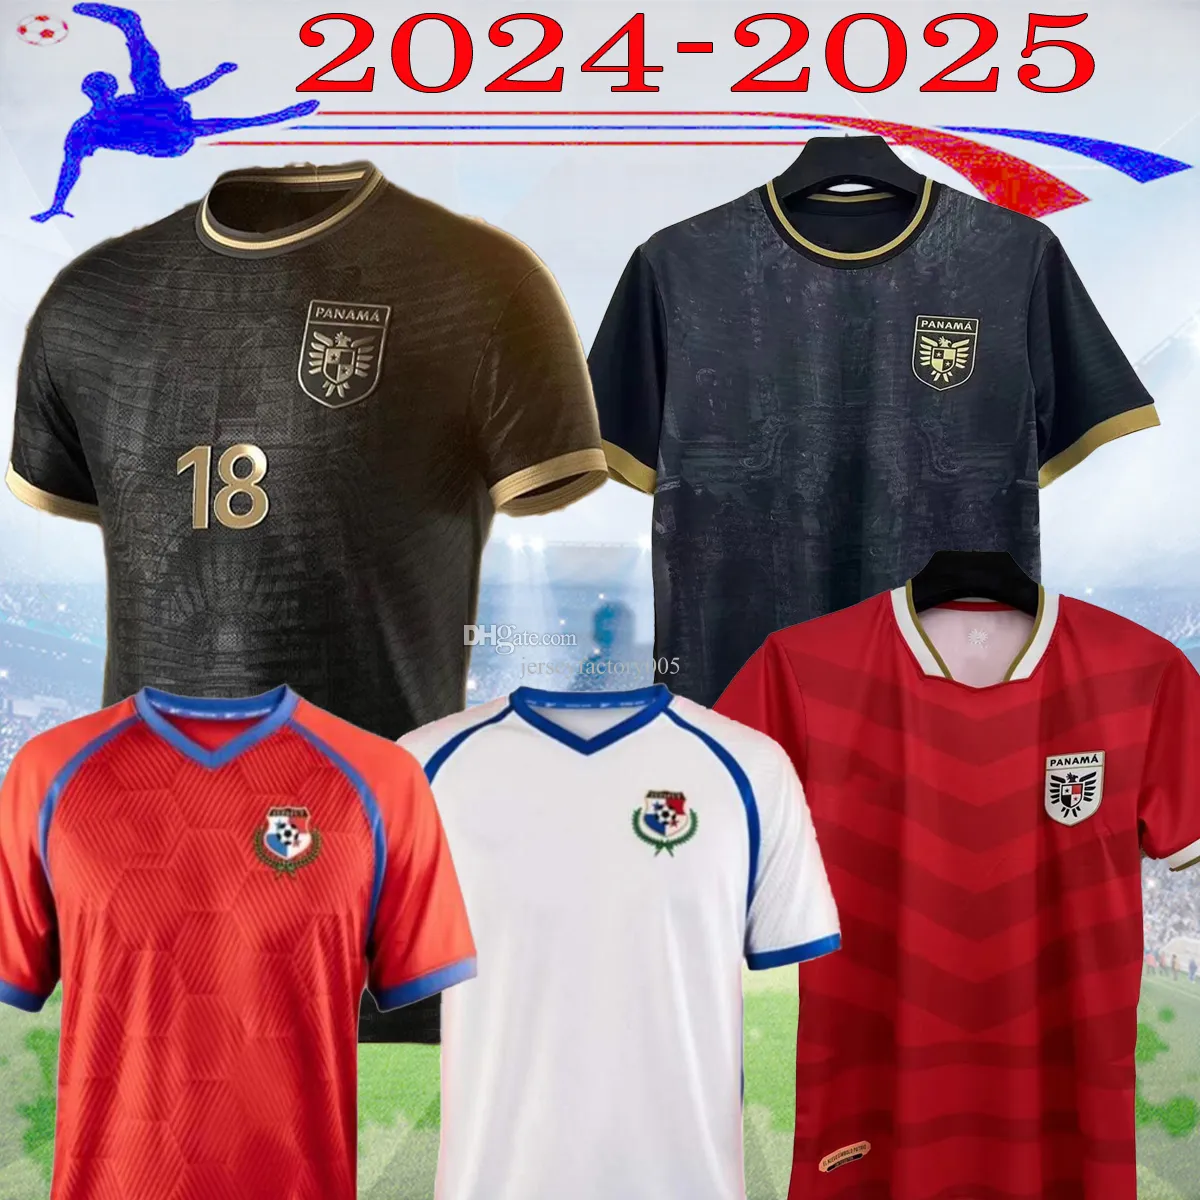 2024 2025 Panama National Team Soccer Jerseys COX TANNER 24 25 Black CARRASQUILLA GODOY Home Red Away White Mens Football Shirts